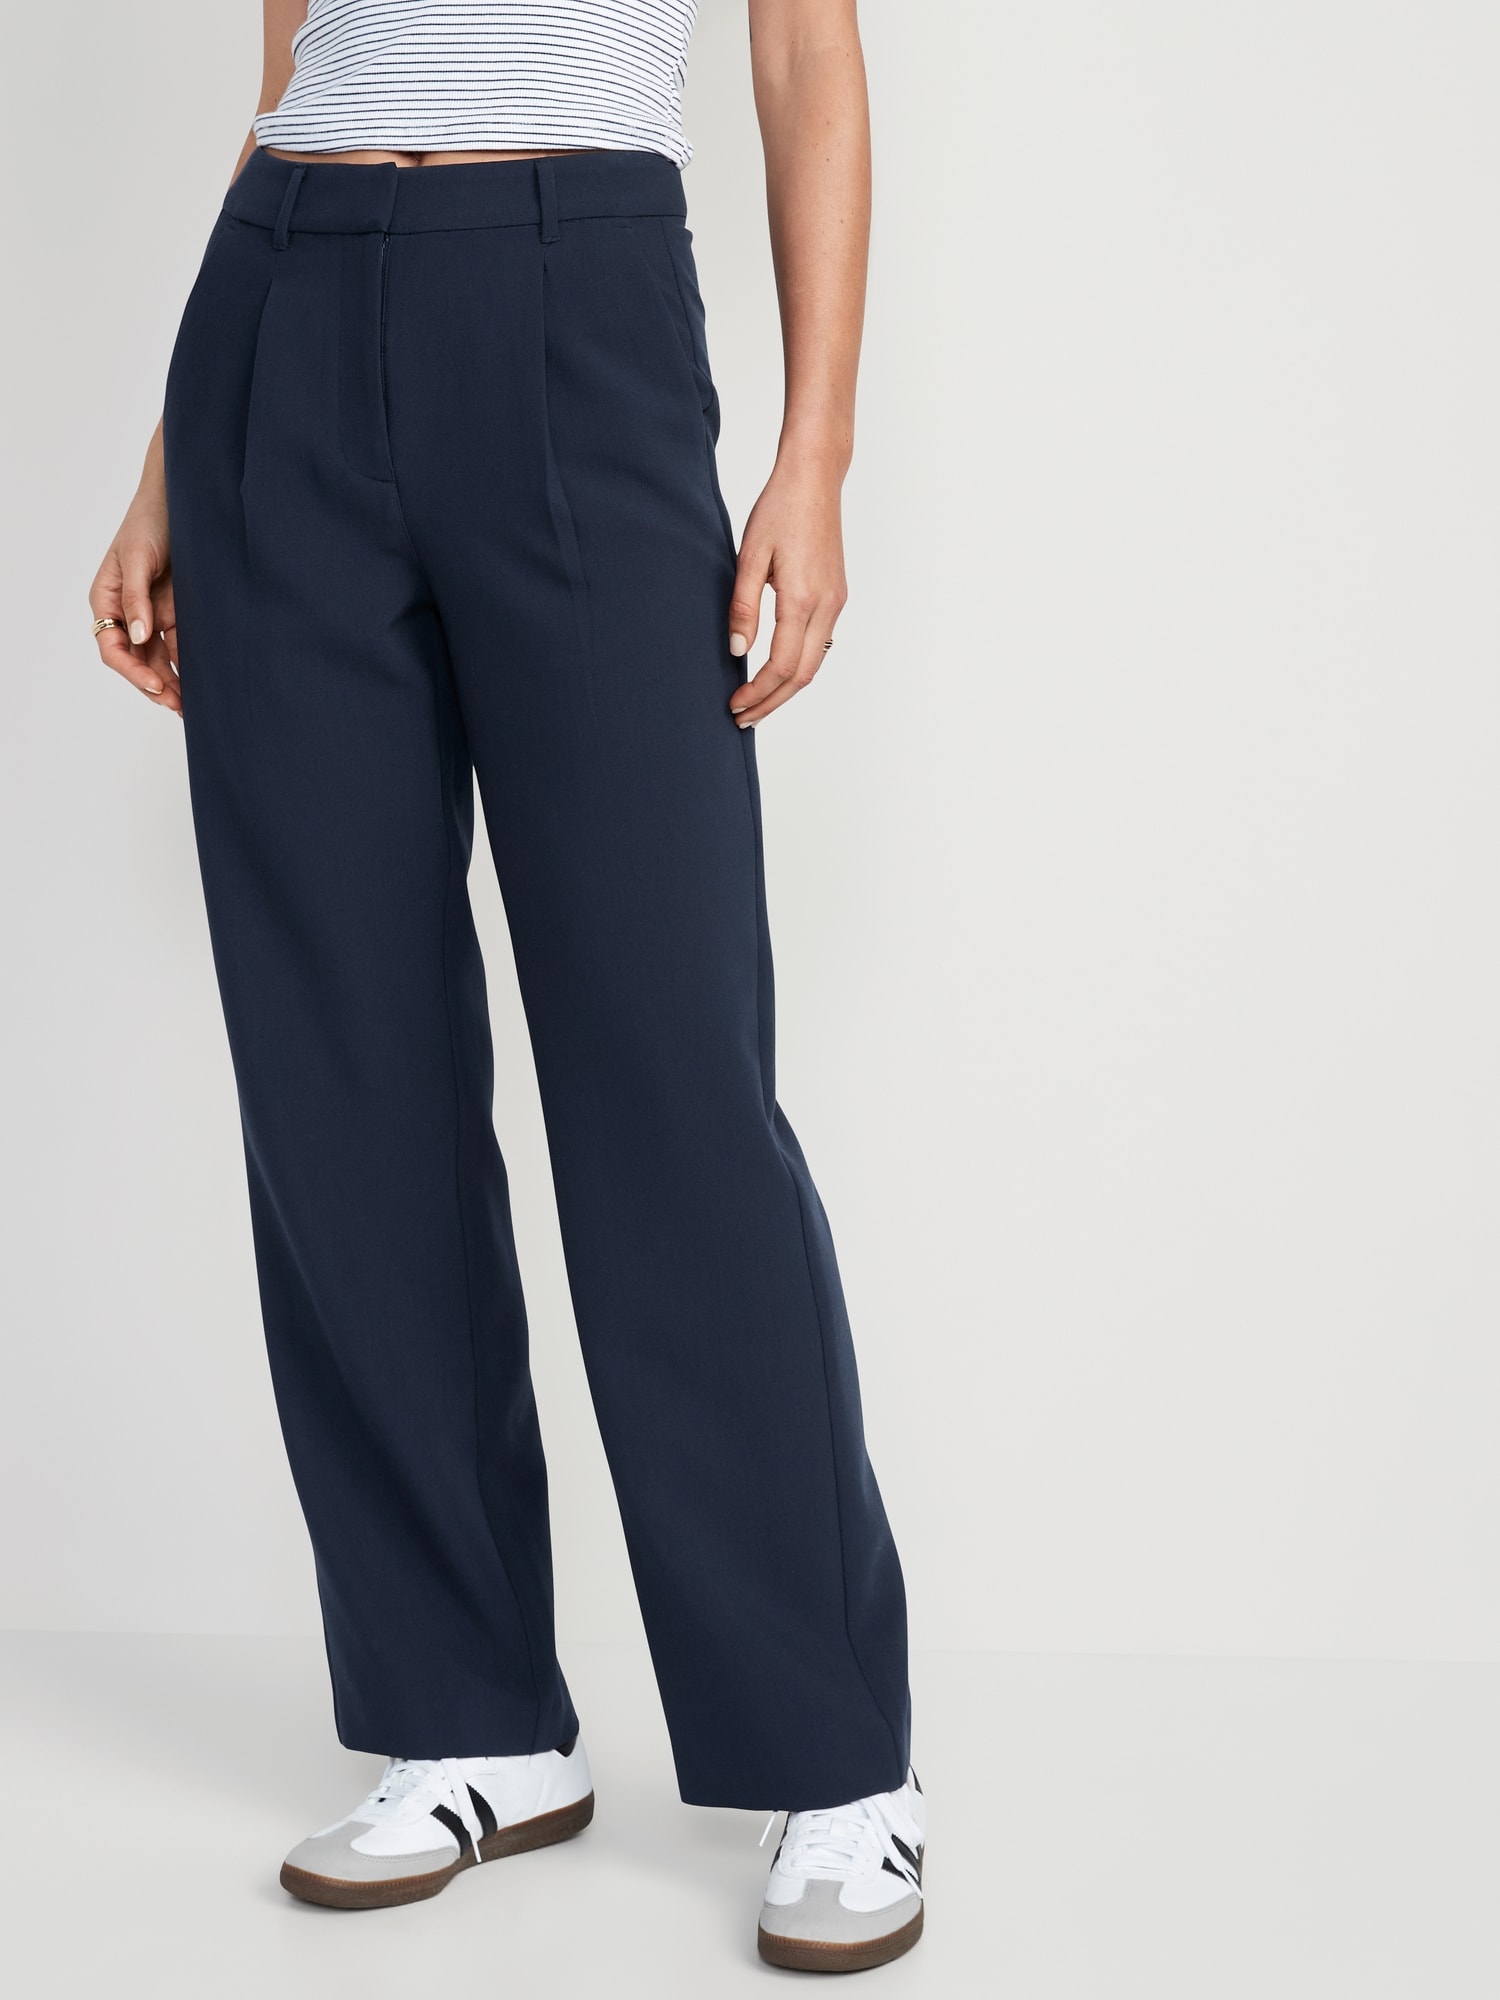 Tristan New Wool Tapered Trouser - Navy